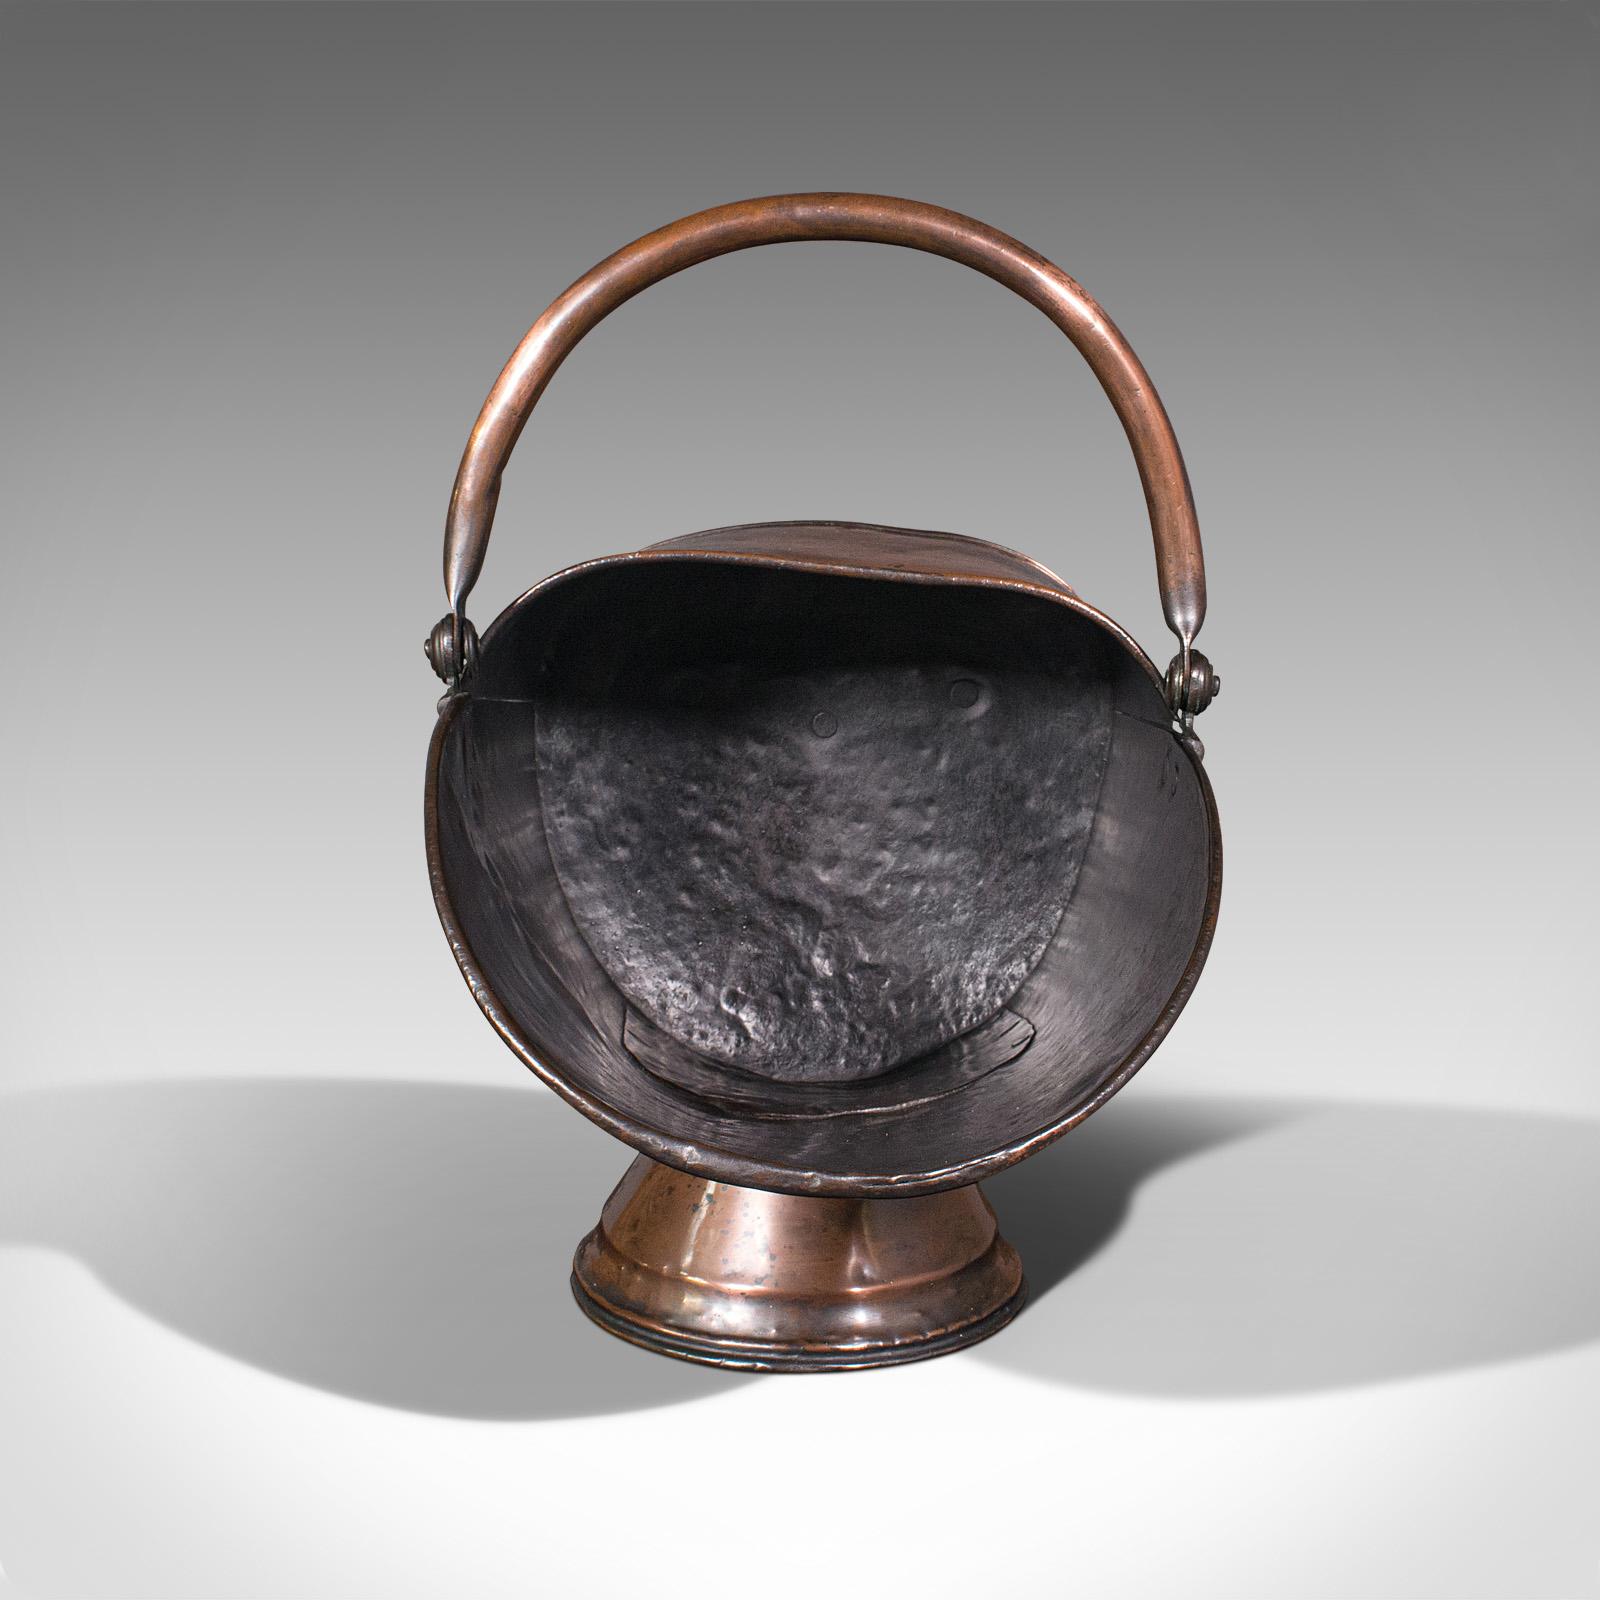 This is an antique helmet scuttle. An English, copper fireside coal or log bucket, dating to the early Victorian period, circa 1850.

Hand-beaten, eye-catching and delightfully patinated scuttle
Displays a desirable aged patina throughout
Copper